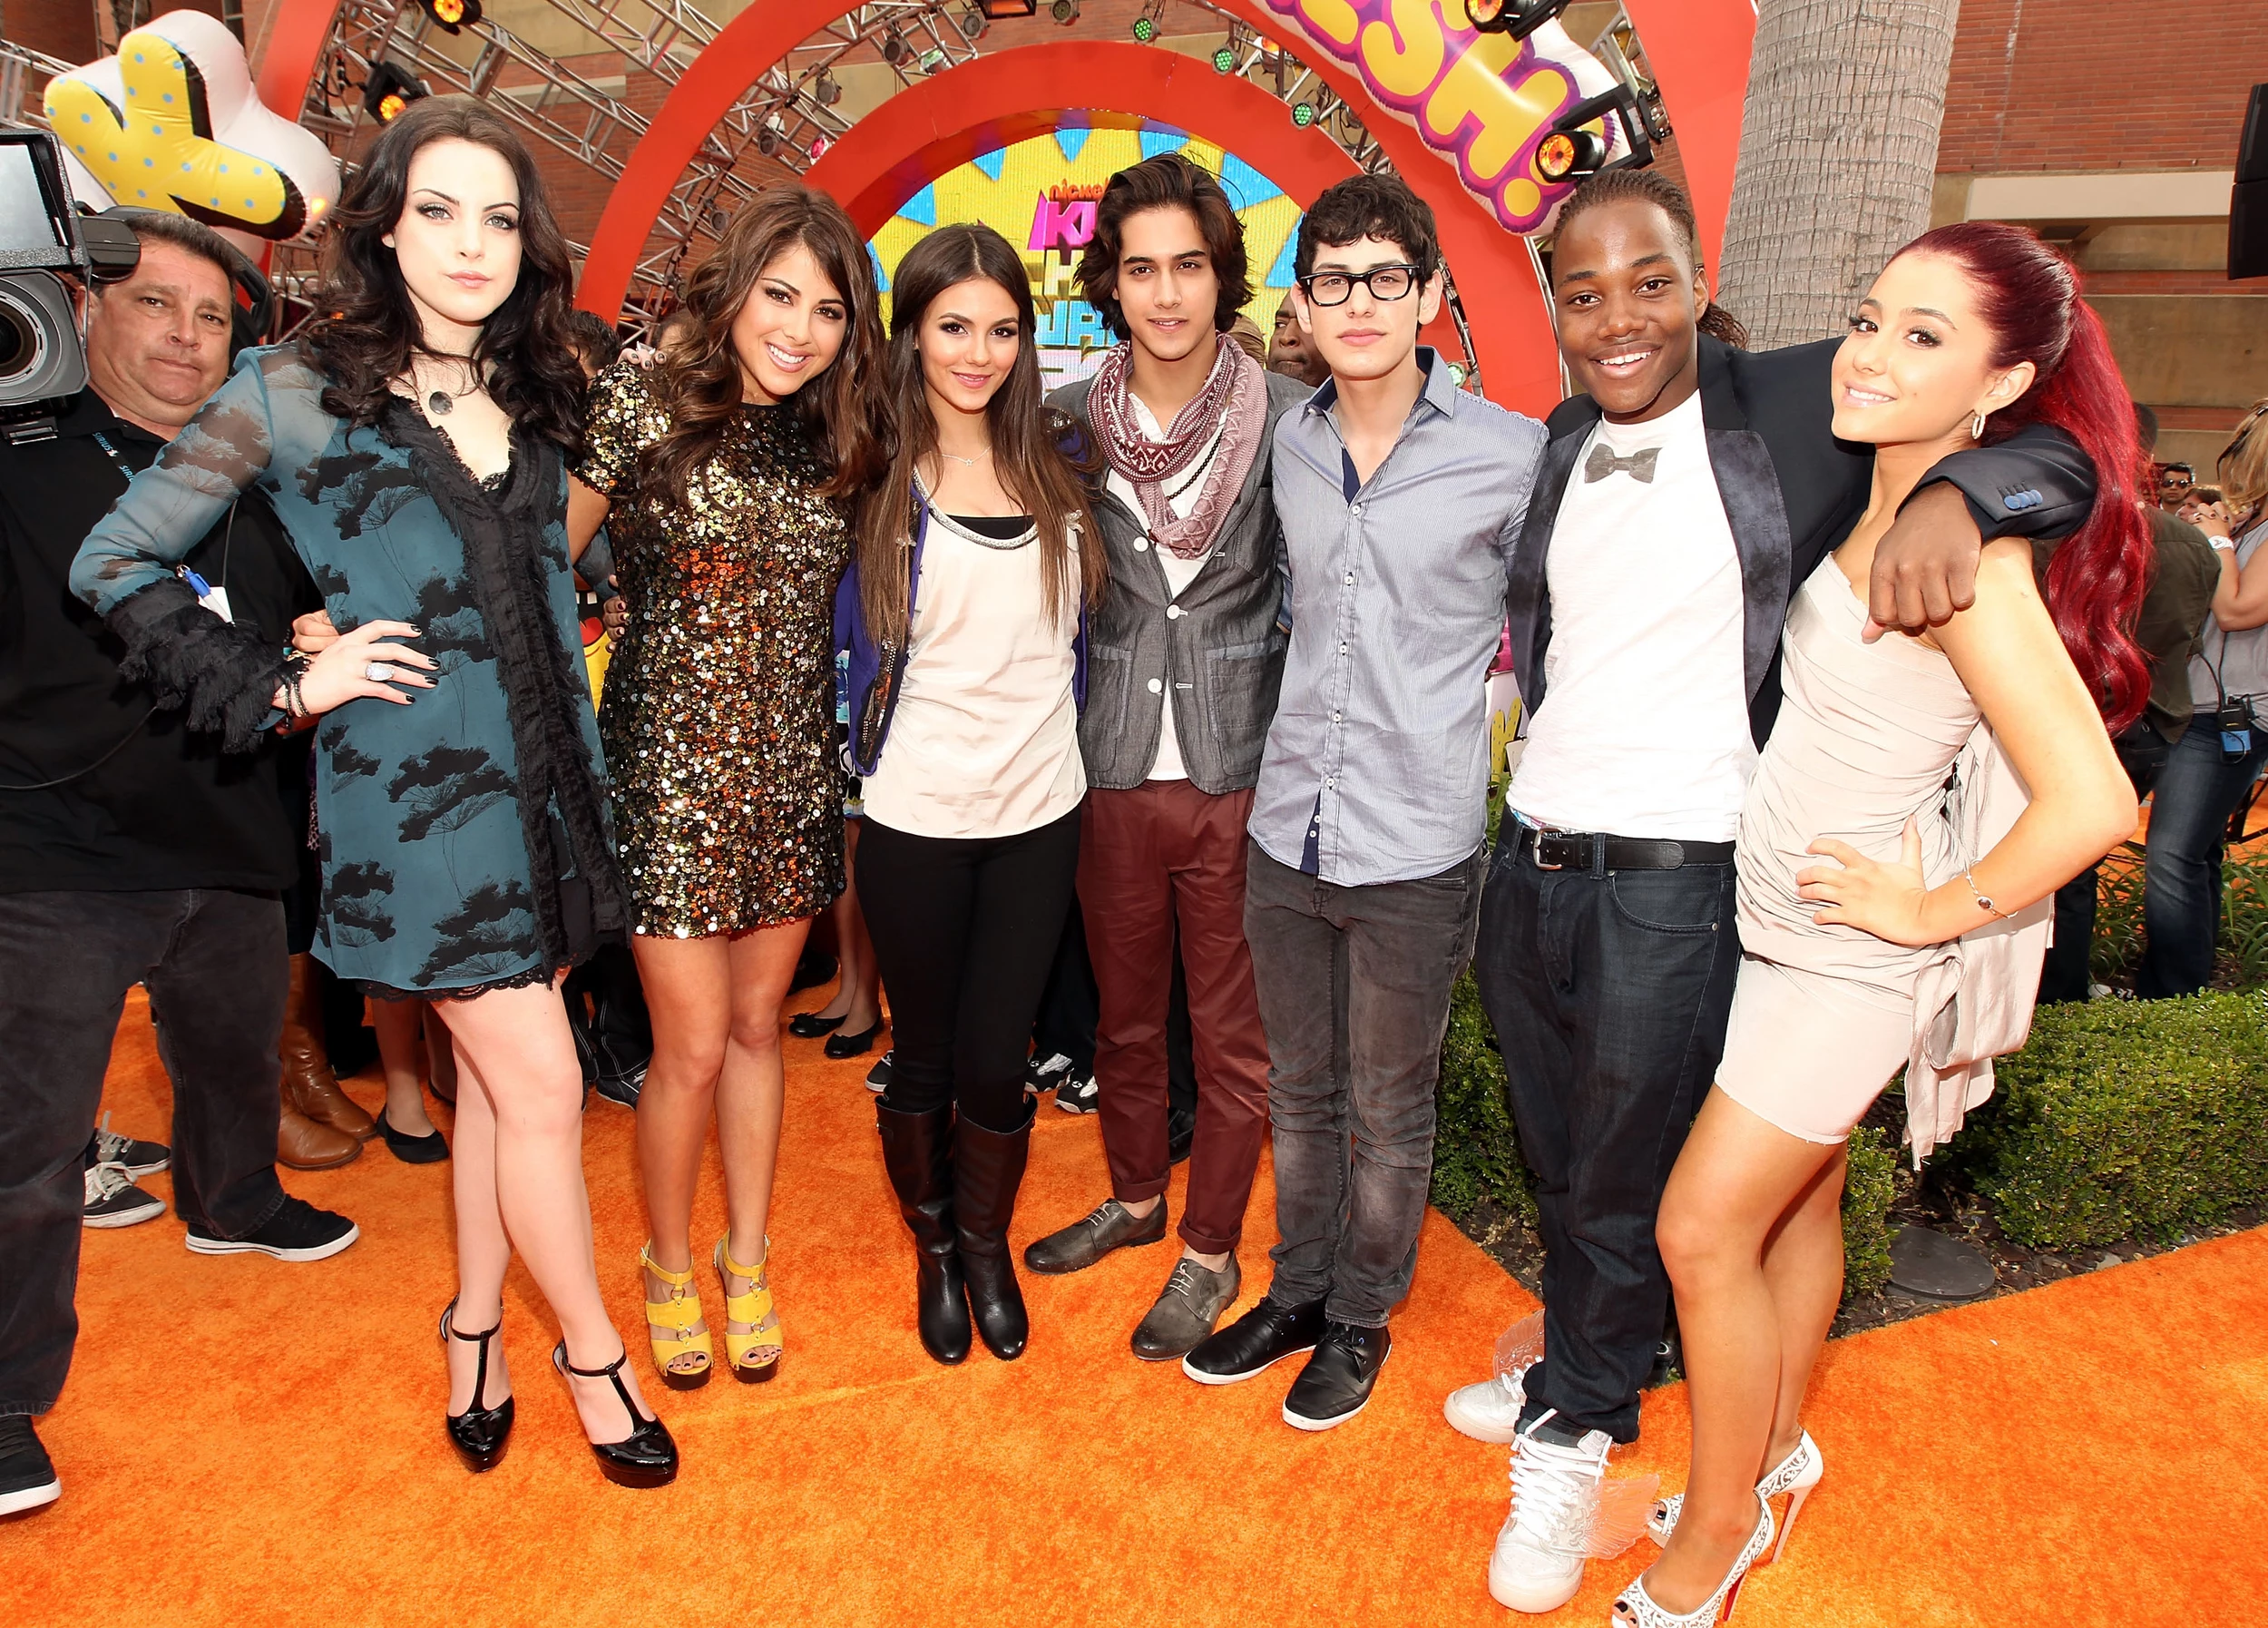 The Victorious Cast Celebrates The Show's 10th Anniversary on Instagram